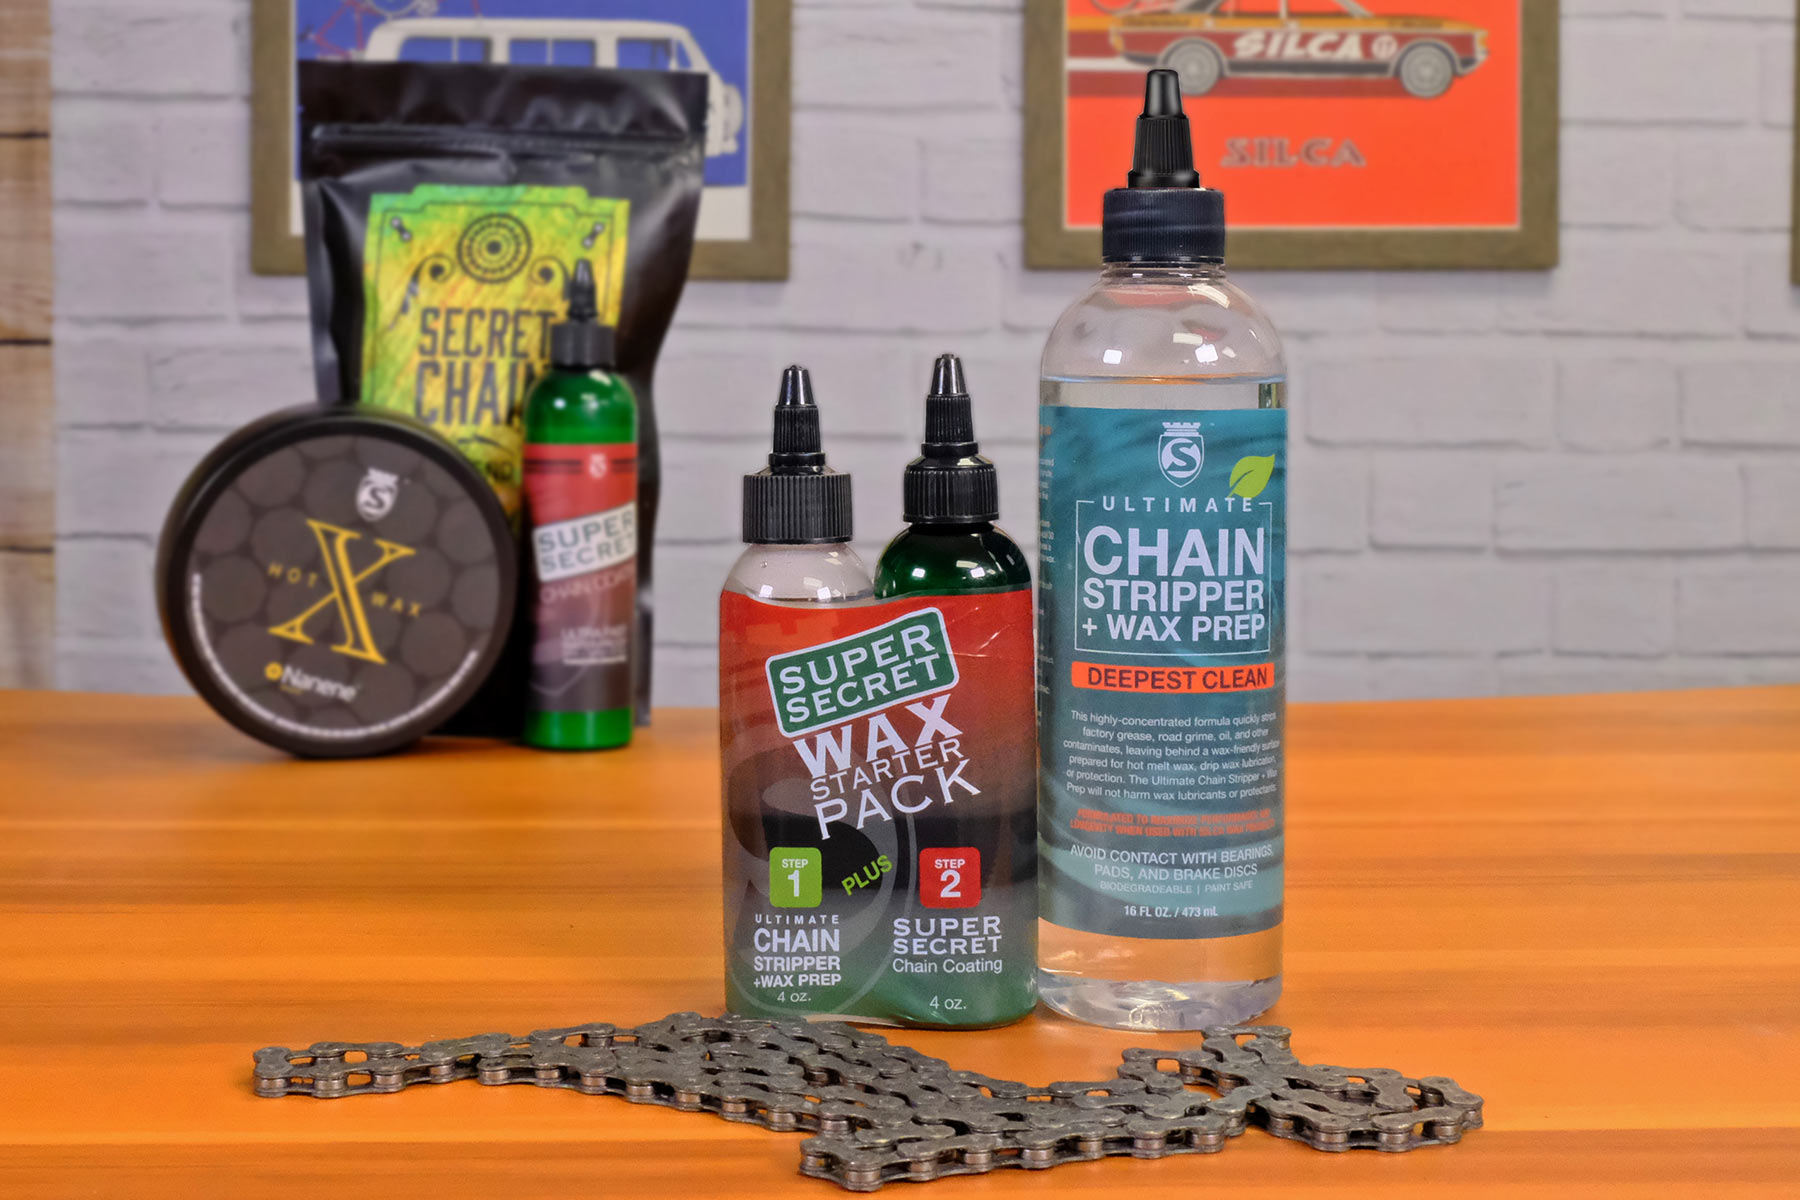 Silca Ultimate Chain Stripper and Wax Prep easy drivetrain cleaner makes you faster